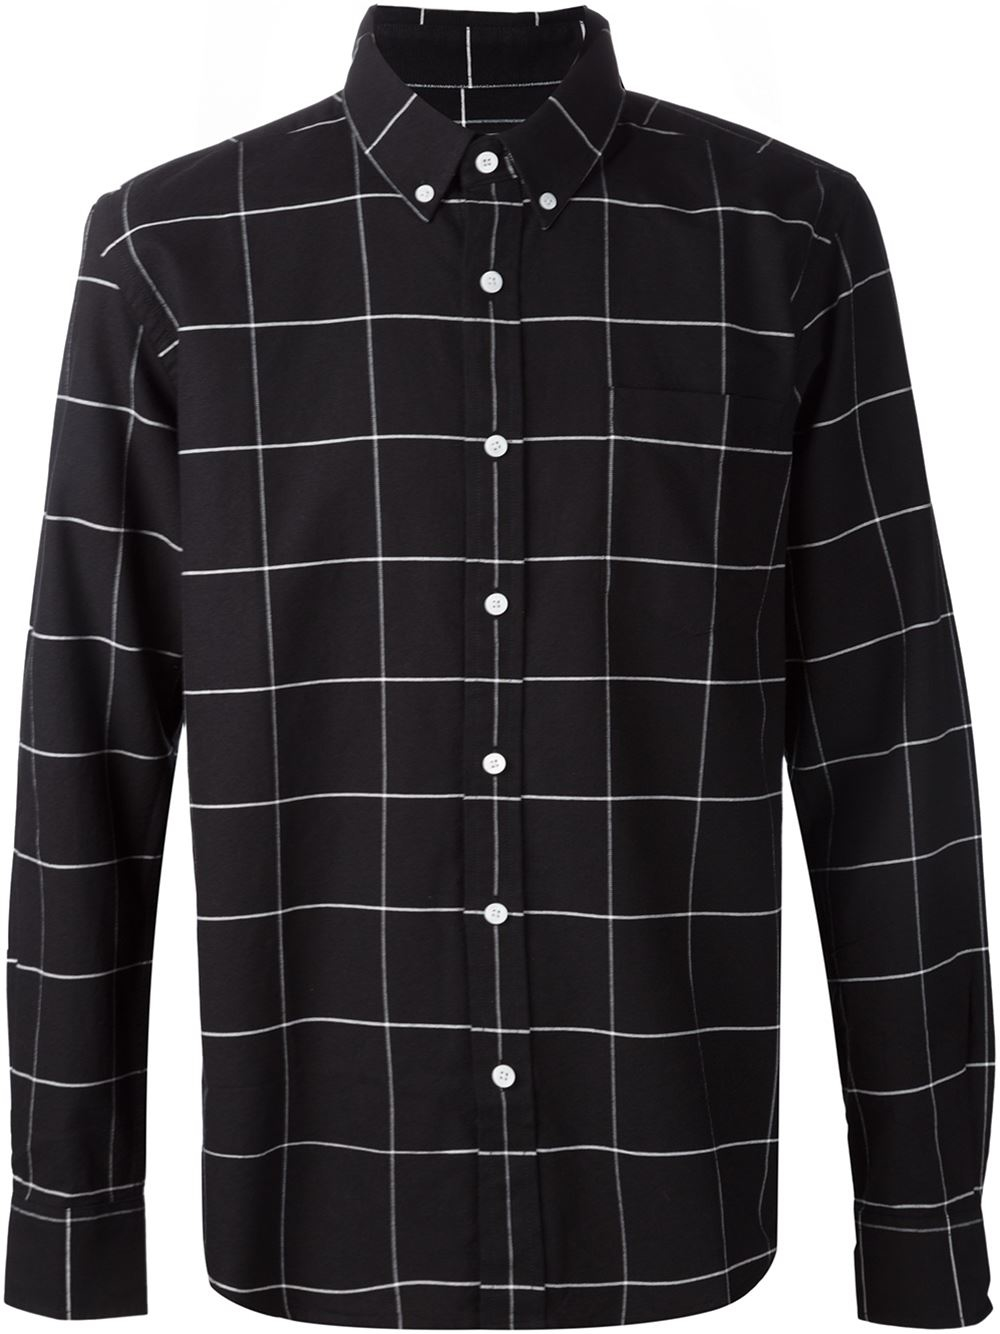 Saturdays NYC Woven Grid Shirt in Black for Men - Lyst